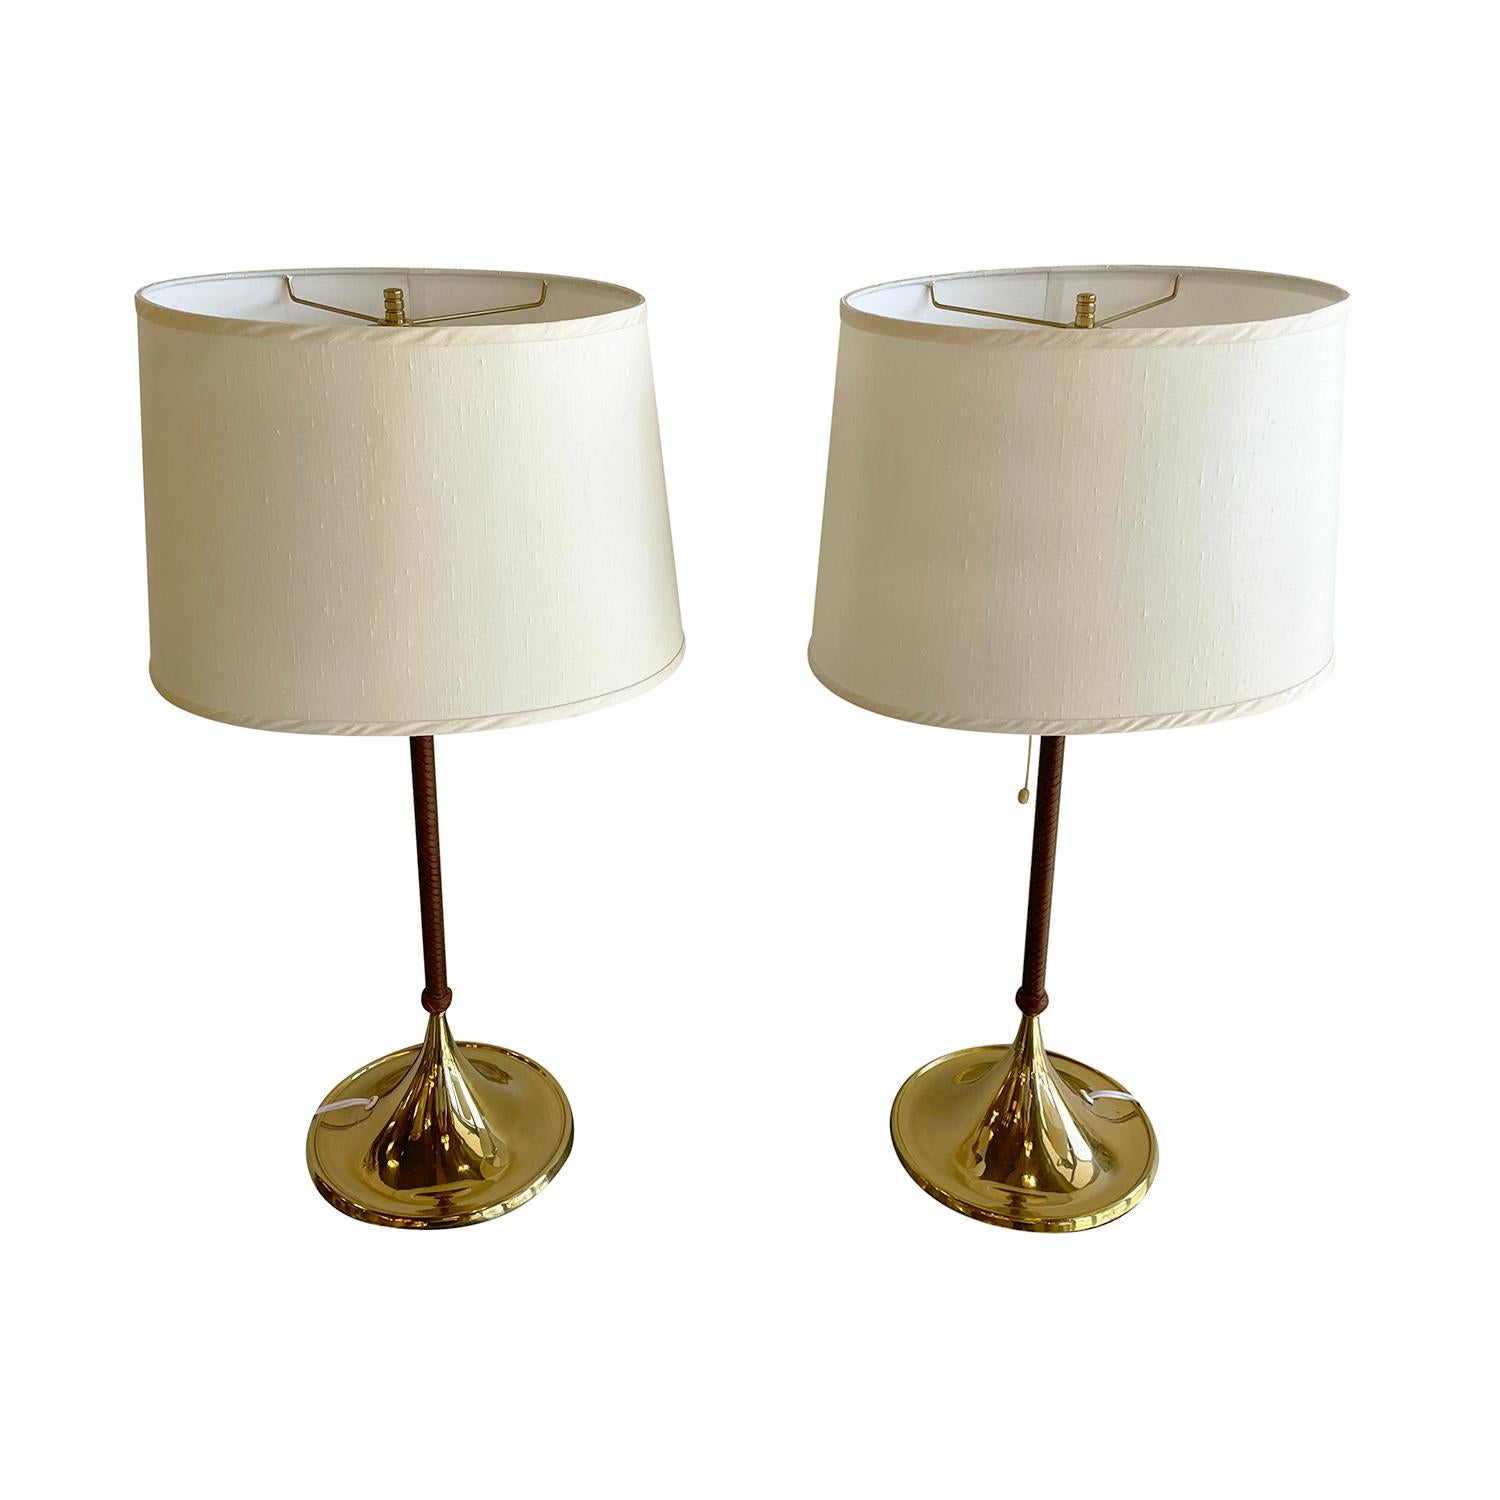 A vintage Mid-Century Modern Swedish pair of table lamps with a new white-yellow oval shade made of hand crafted polished brass, designed most likely by Alf Svensson & Yngve Sandström and produced by Bergboms in good condition. The stem of the